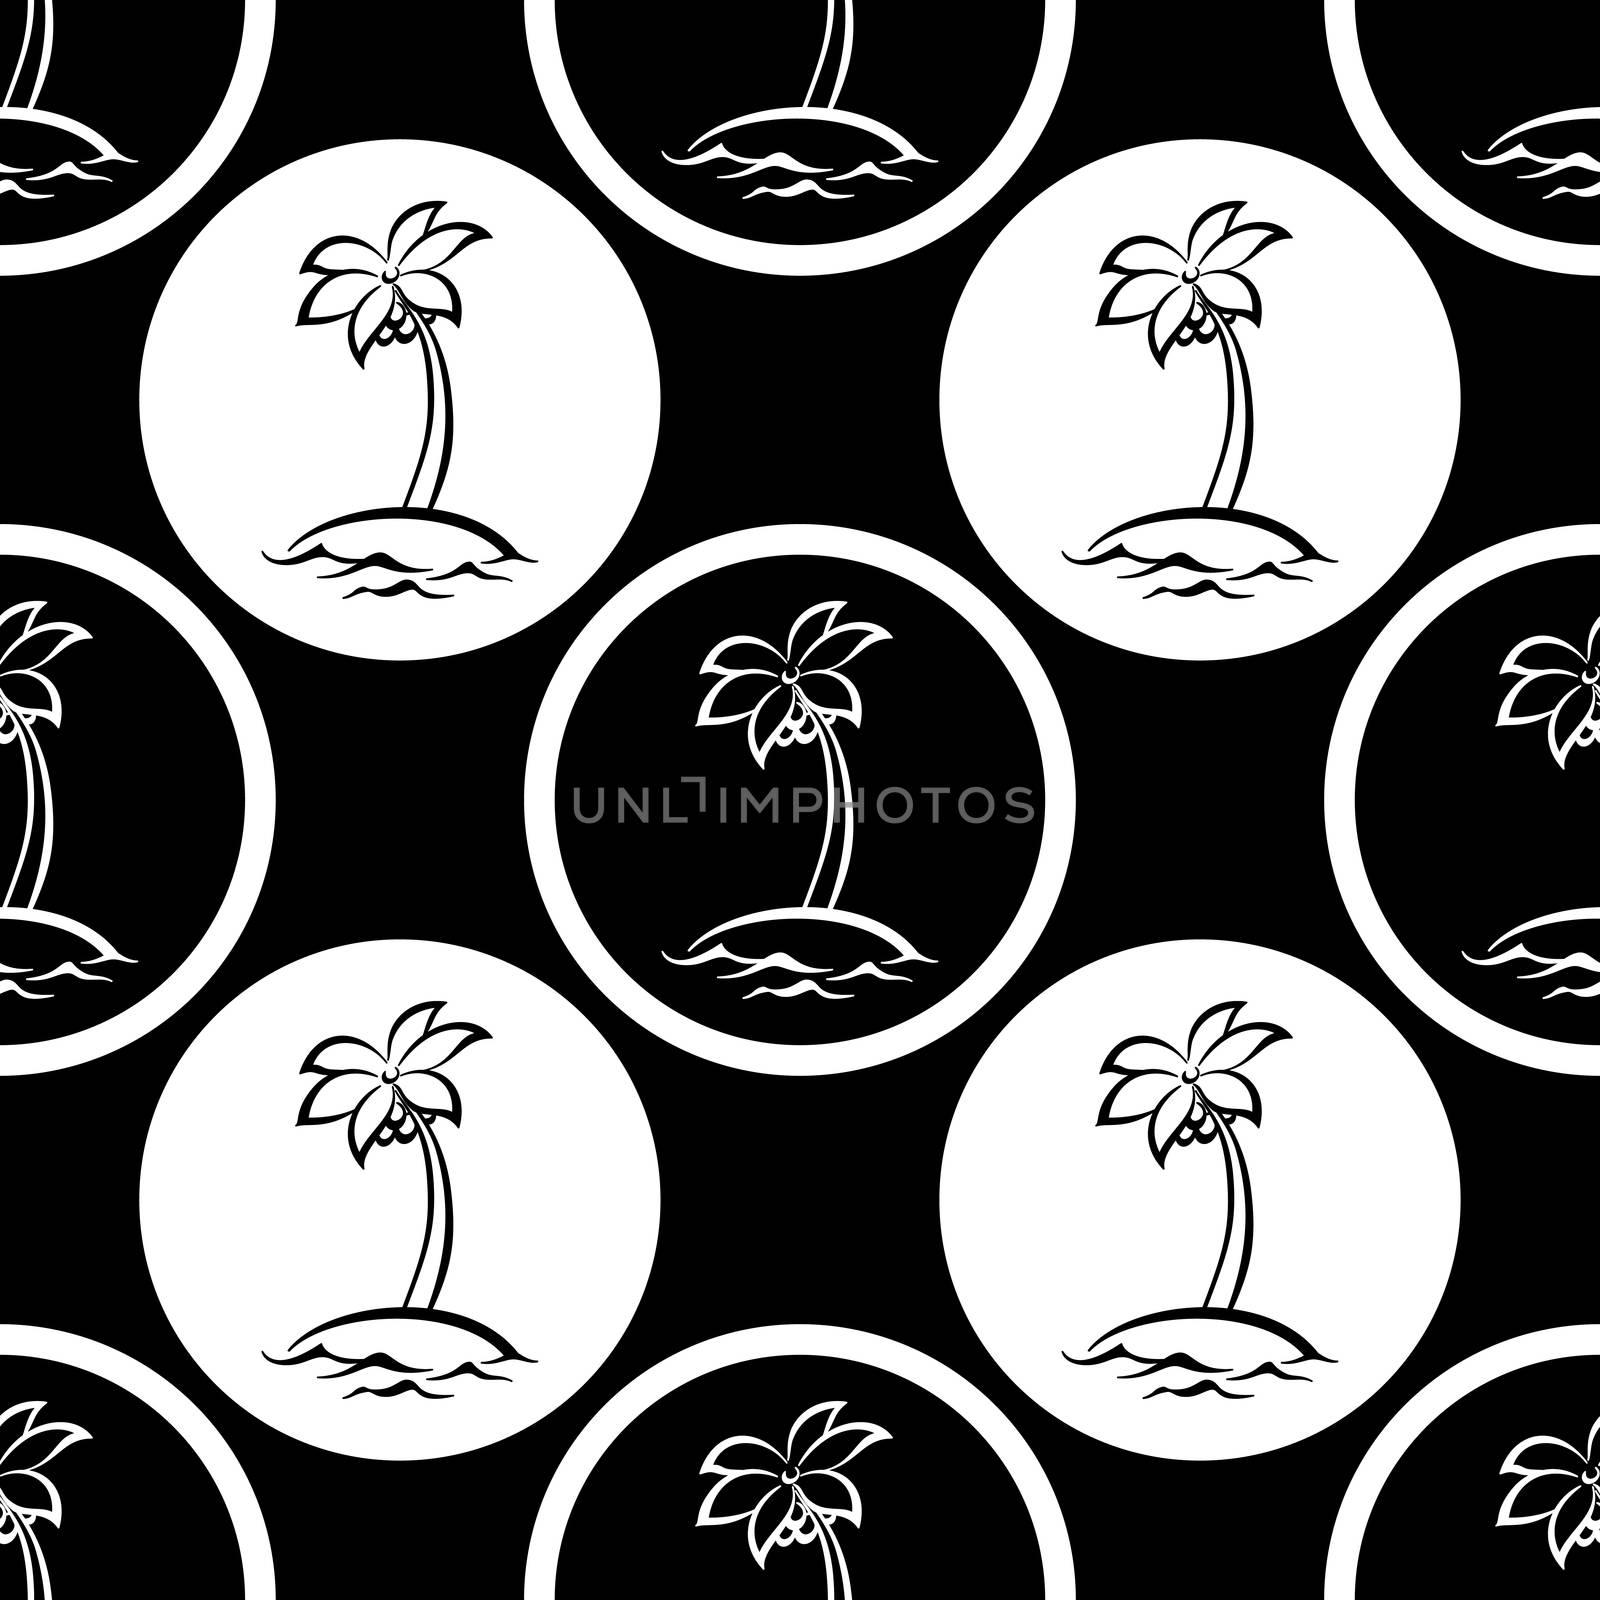 Seamless pattern, symbolical islands with palm trees in circles, black and white silhouettes.